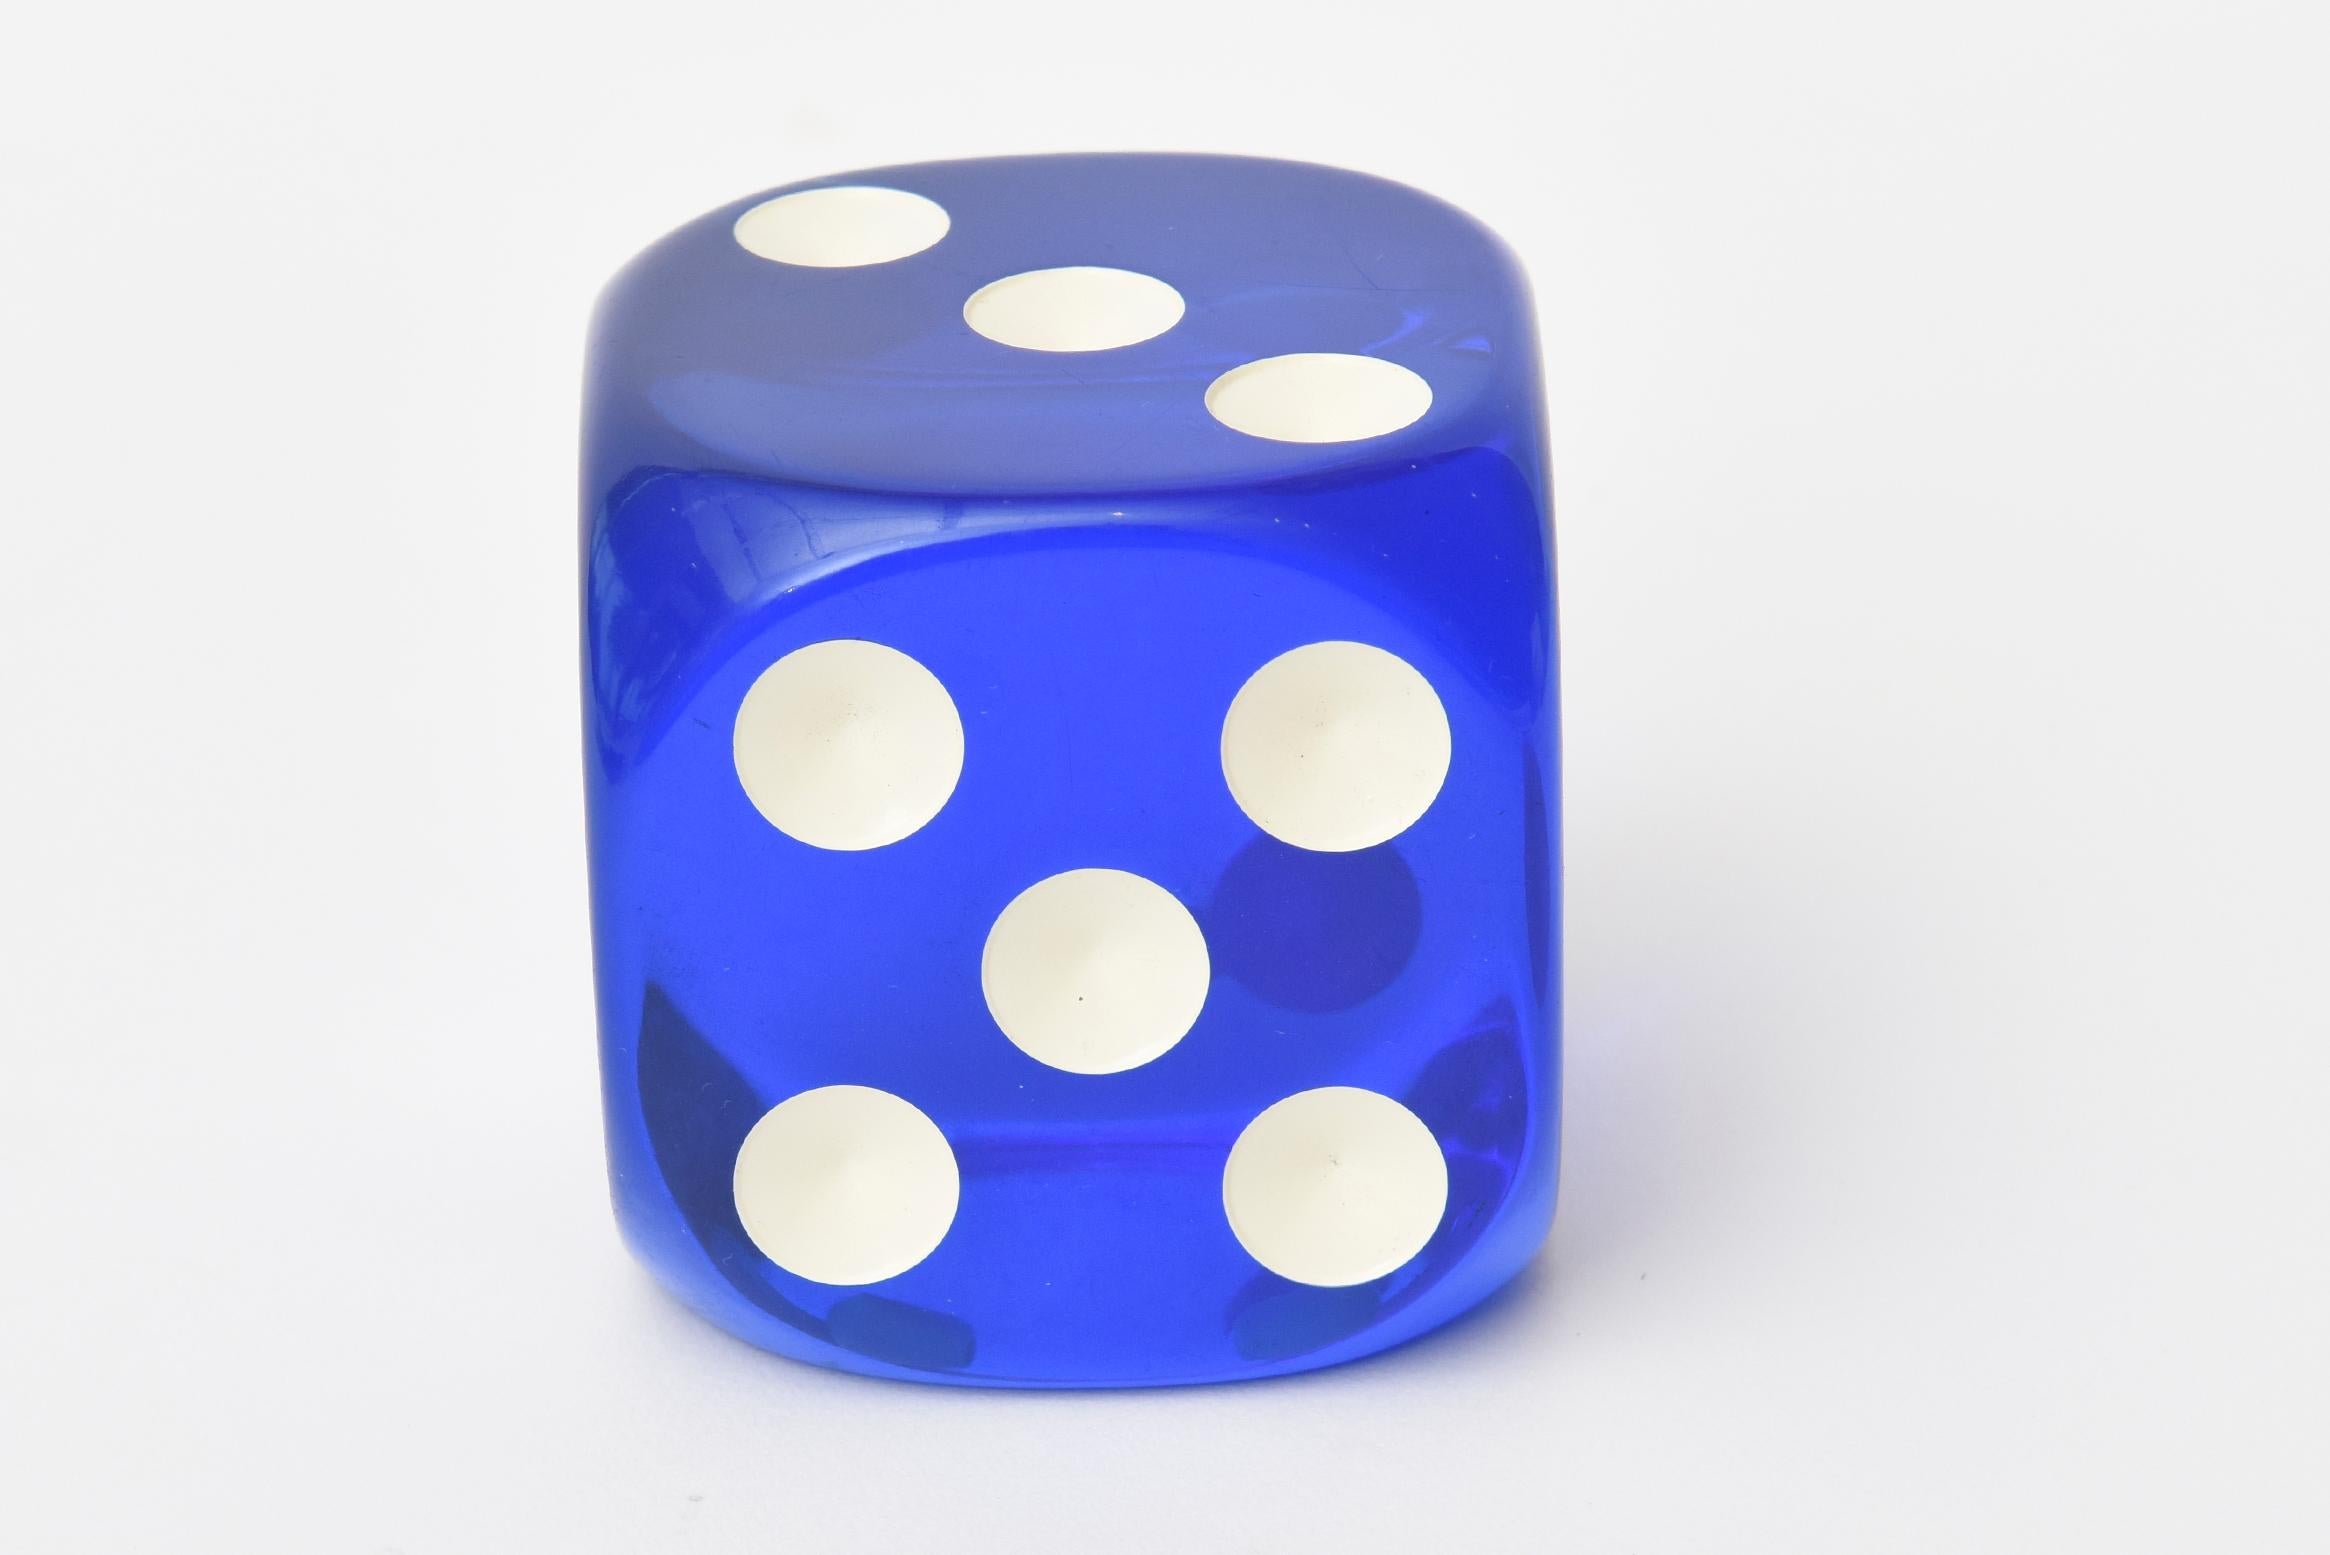 This wonderful cobalt blue vintage bakelite dice makes a great desk accessory or cocktail table object. The color is wonderful.
It will act as a piece of bakelite sculpture. It is from the 1940s and Mid-Century Modern.